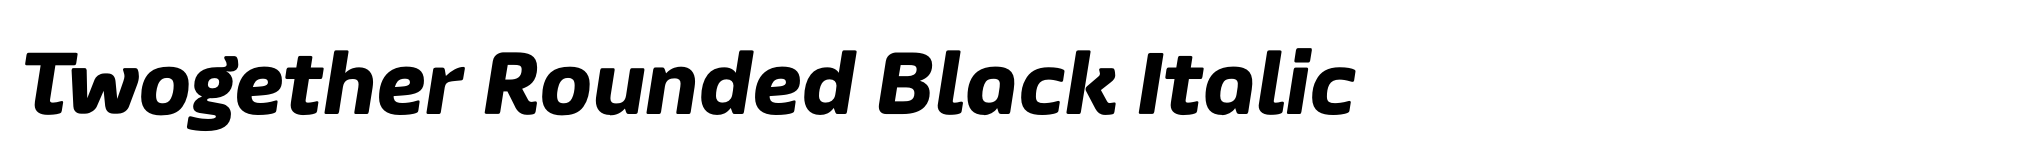 Twogether Rounded Black Italic image